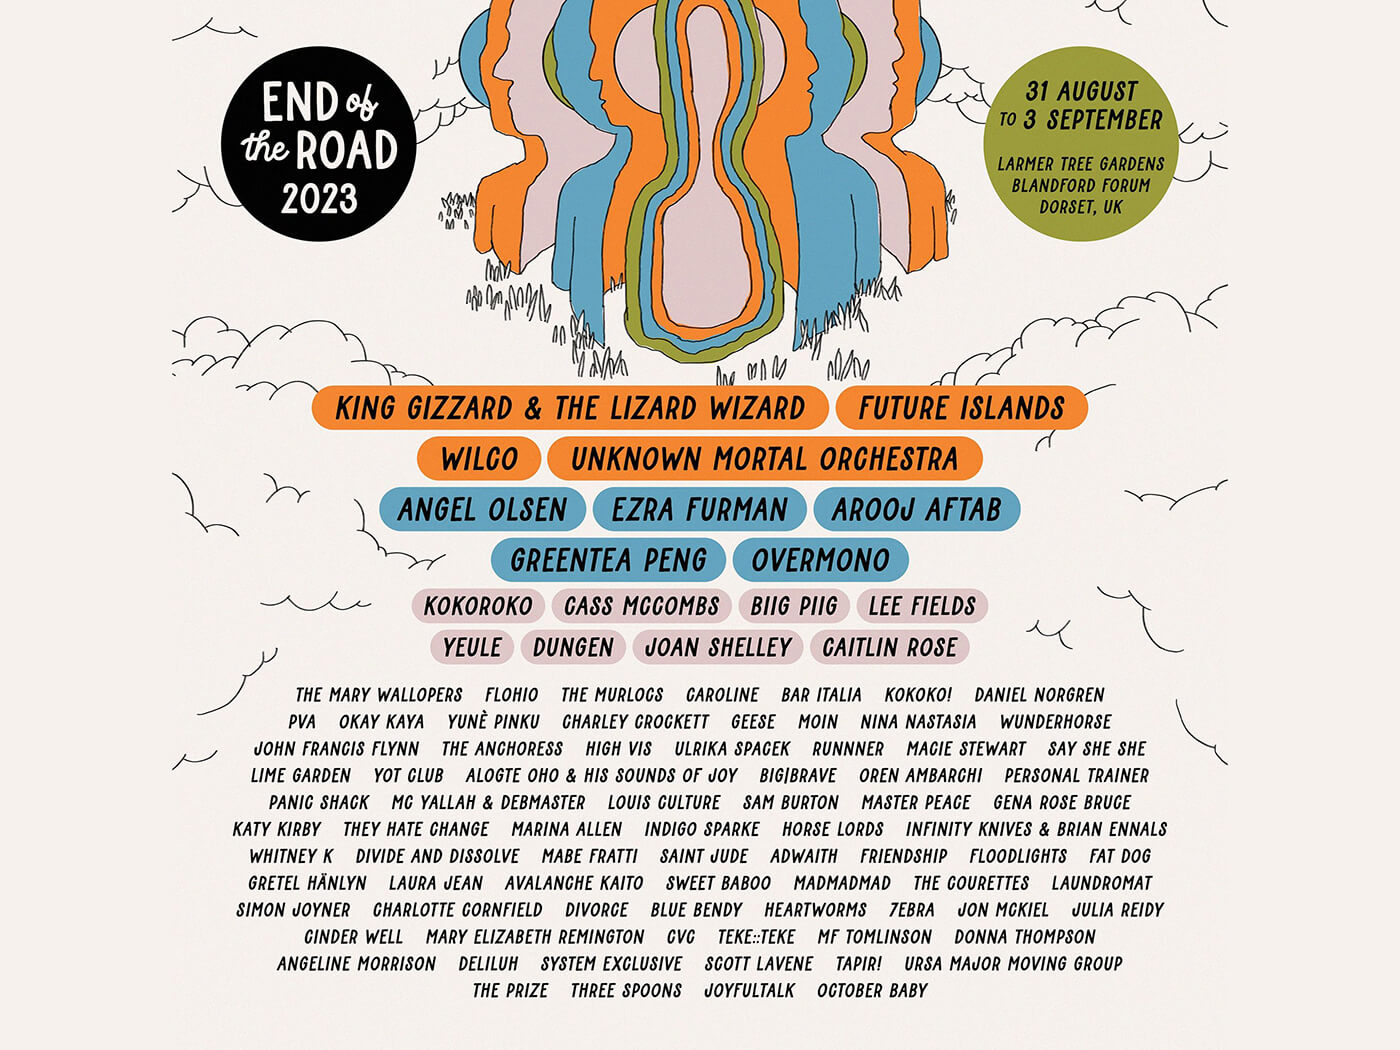 Wilco, King Gizzard & The Lizard Wizard, Angel Olsen, Unknown Mortal Orchestra and more for End Of The Road Festival 2023